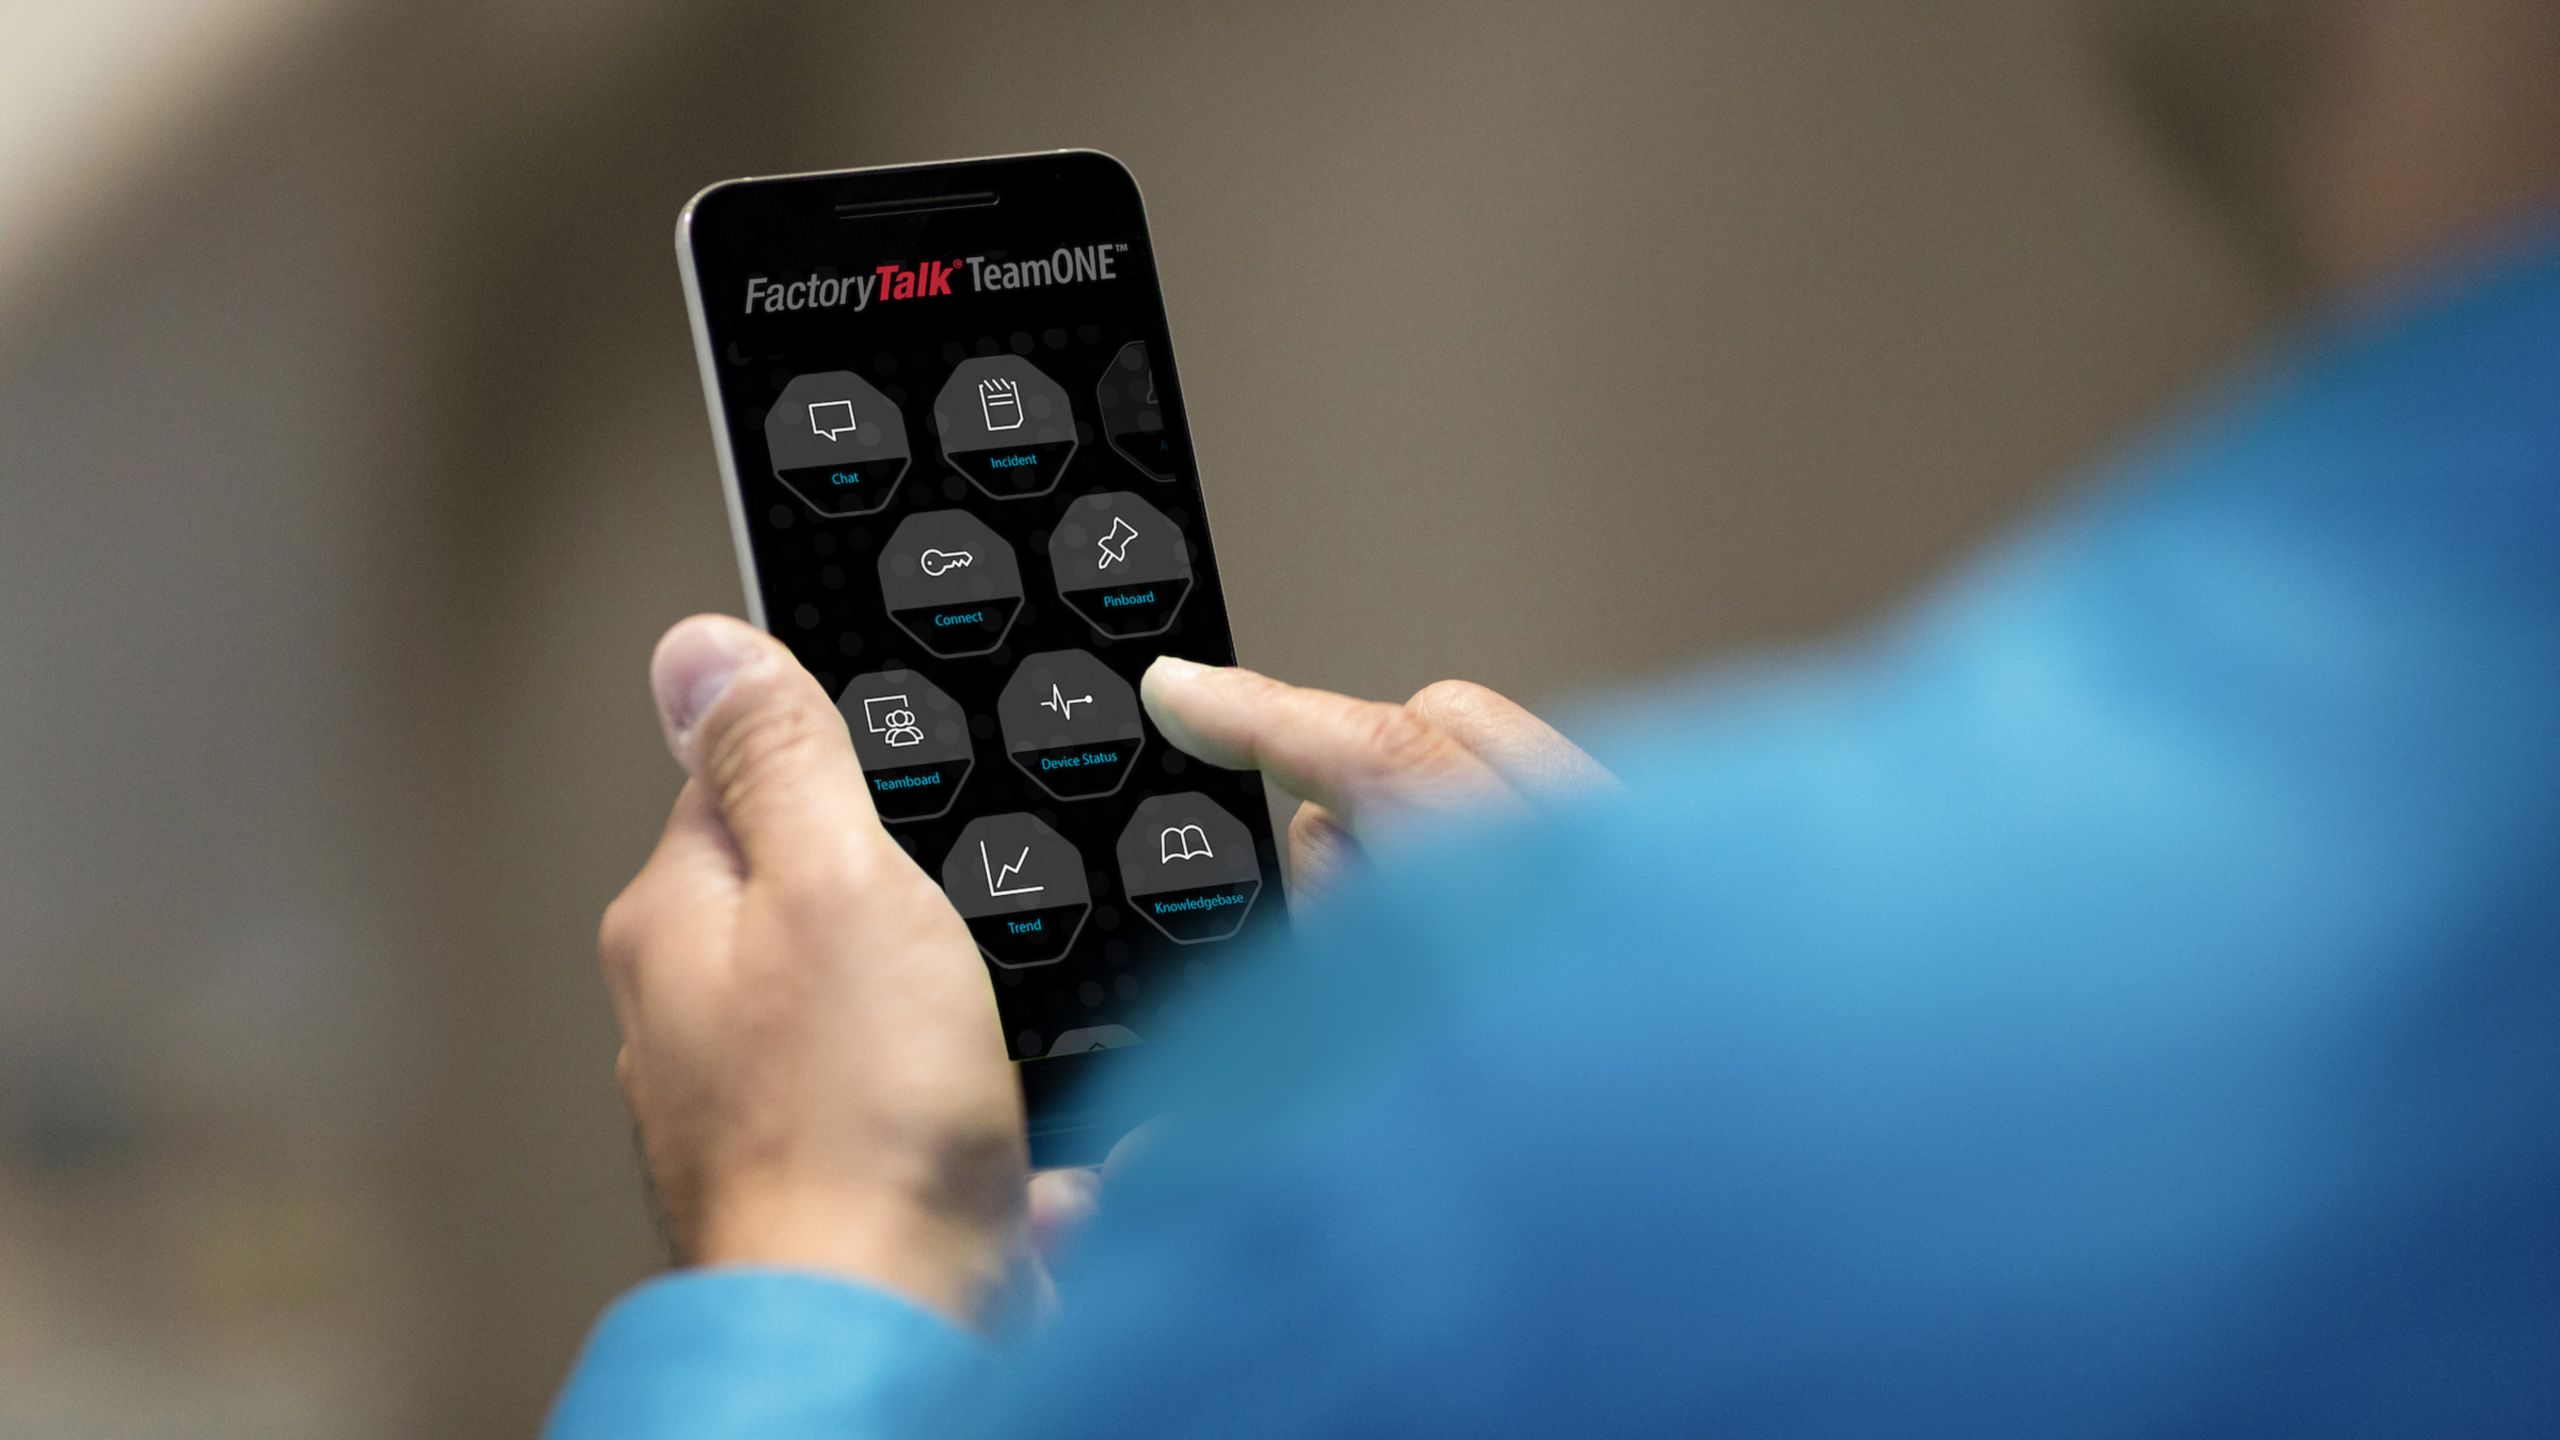 Rockwell Automation employee navigating through the FactoryTalk TeamONE application on his phone